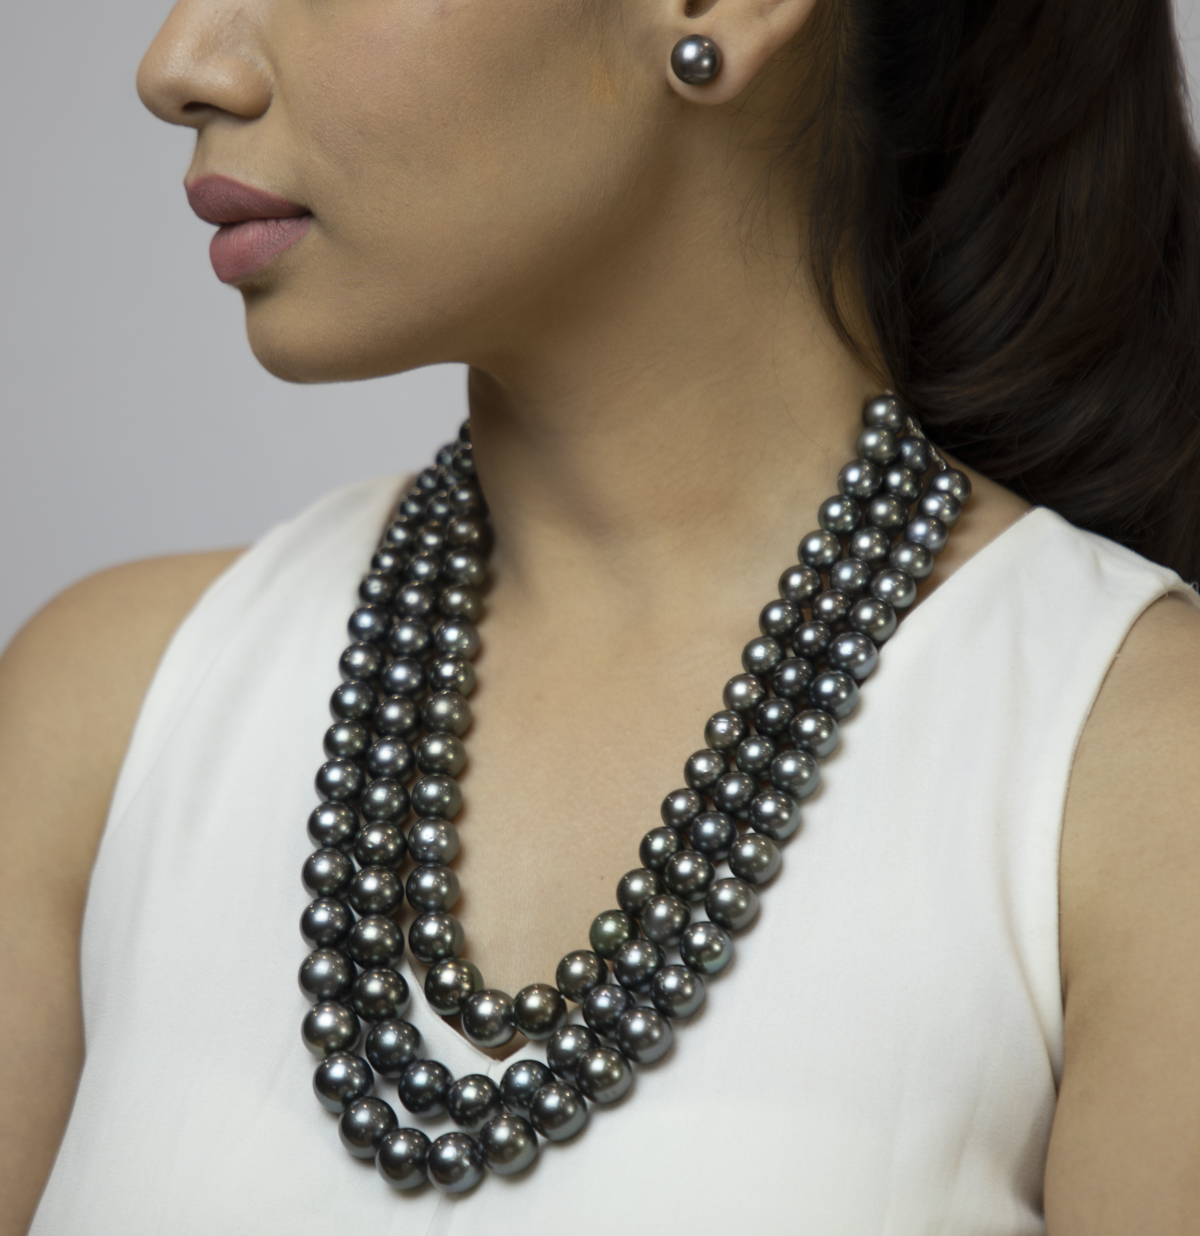 Everything you need to know about investing in pearls - Catawiki